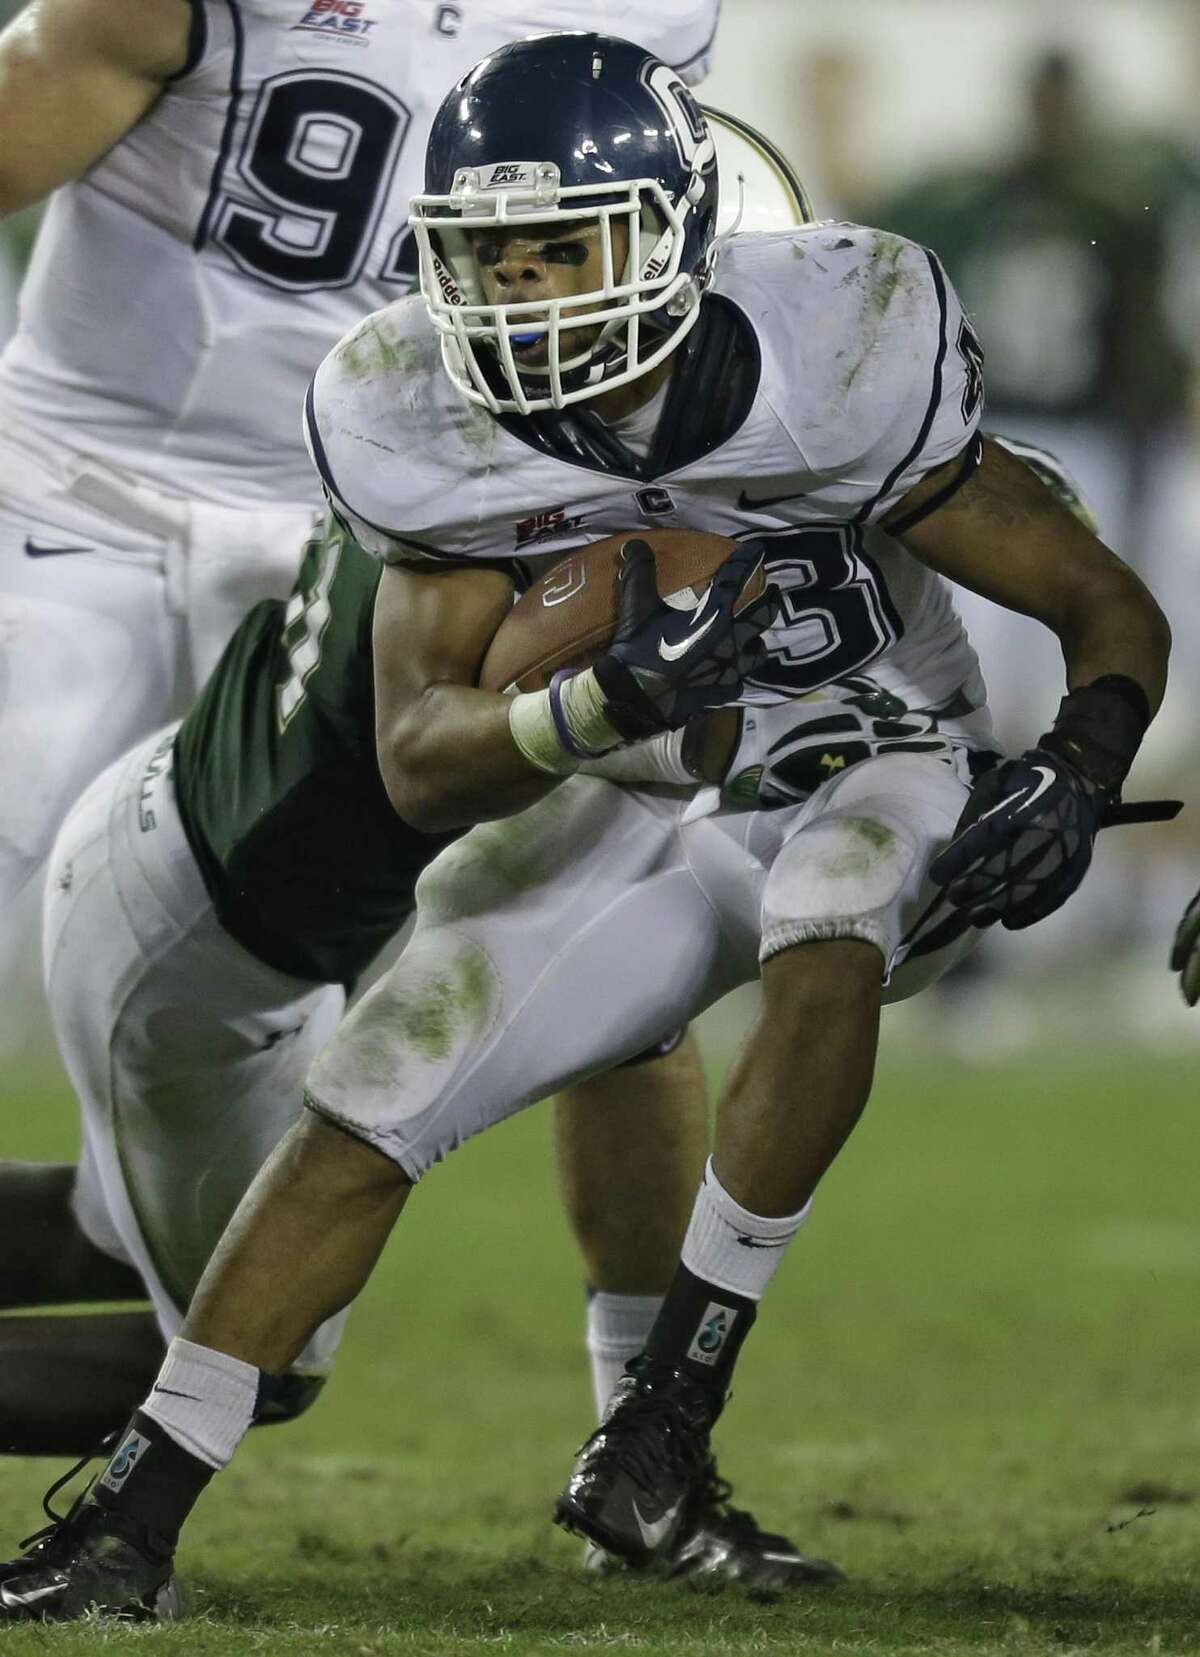 Connecticut running back Lyle McCombs (43) runs with the ball during the fourth quarter of an NCAA college football game against South Florida Saturday, Nov. 3, 2012, in Tampa, Fla. (AP Photo/Chris O'Meara)